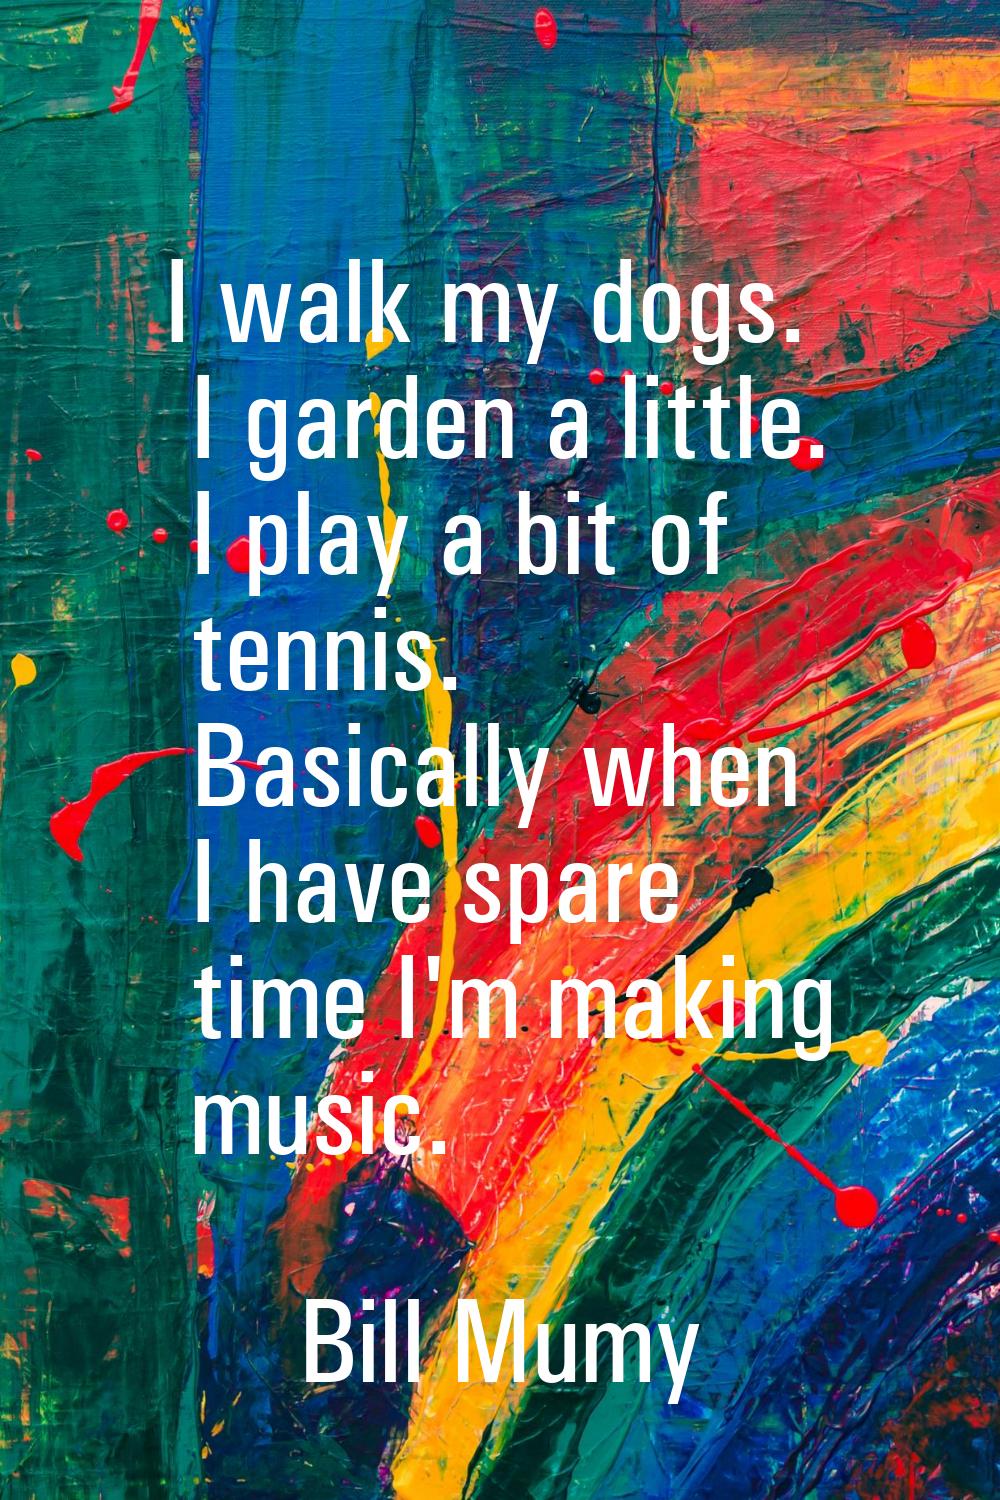 I walk my dogs. I garden a little. I play a bit of tennis. Basically when I have spare time I'm mak